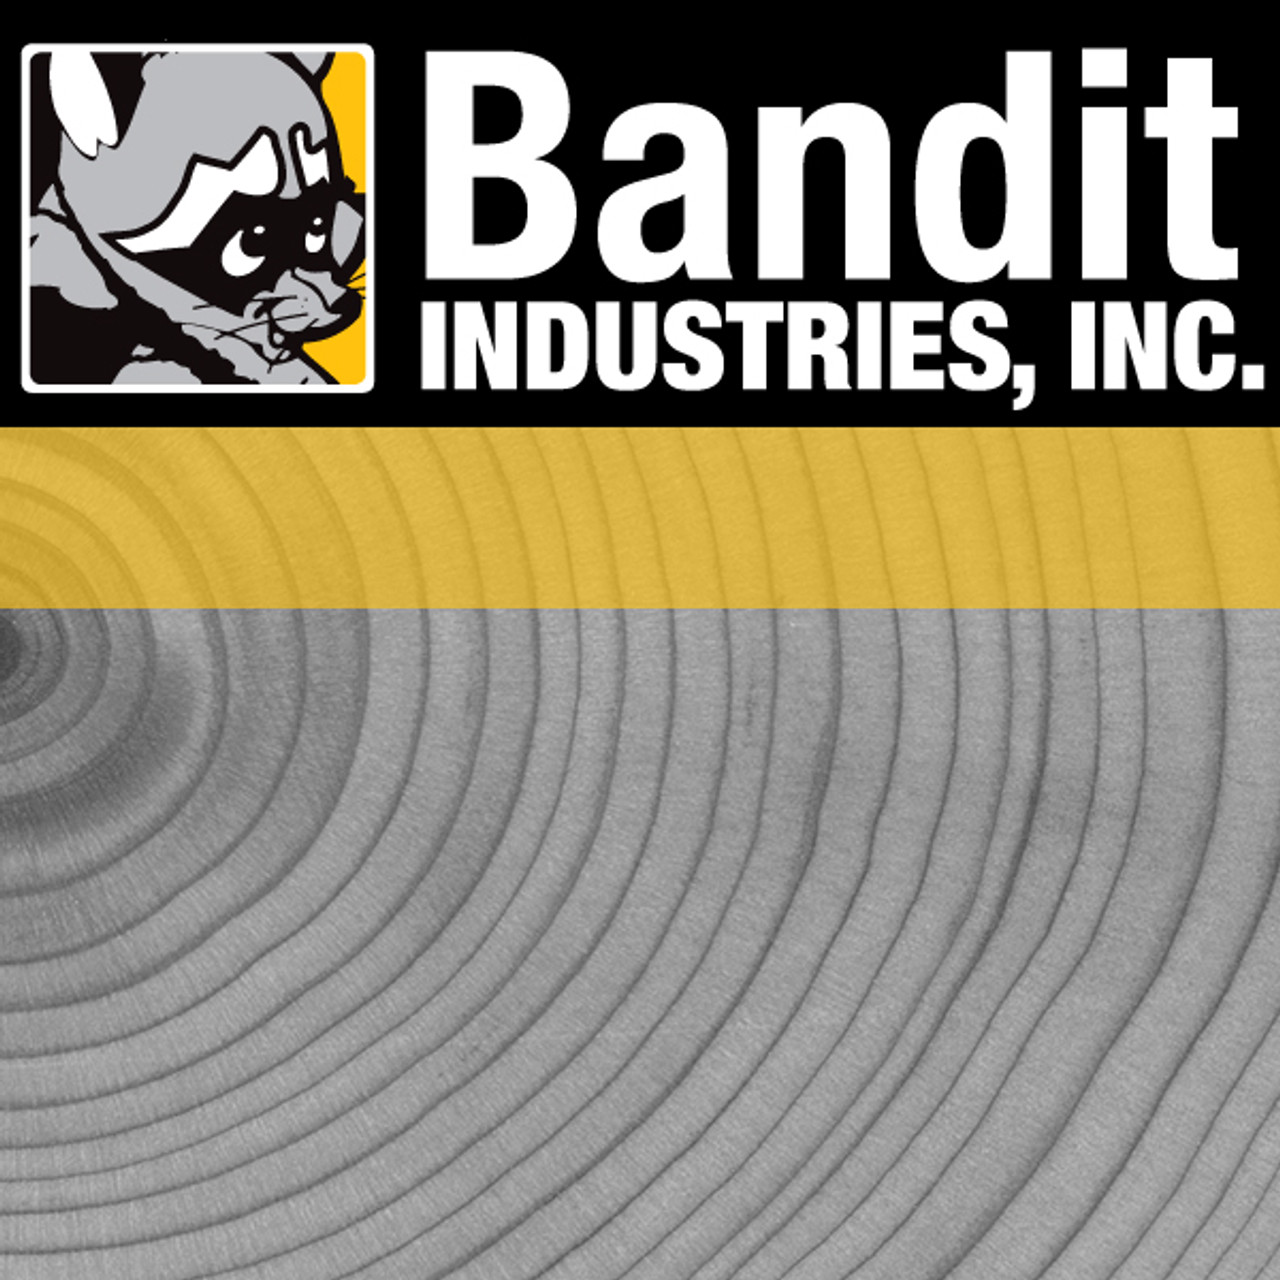 900-9901-03: BANDIT BUSHING FOR CONTROL ARM (5/16"" X 1/2"" X 3/8"")SEE NOTE